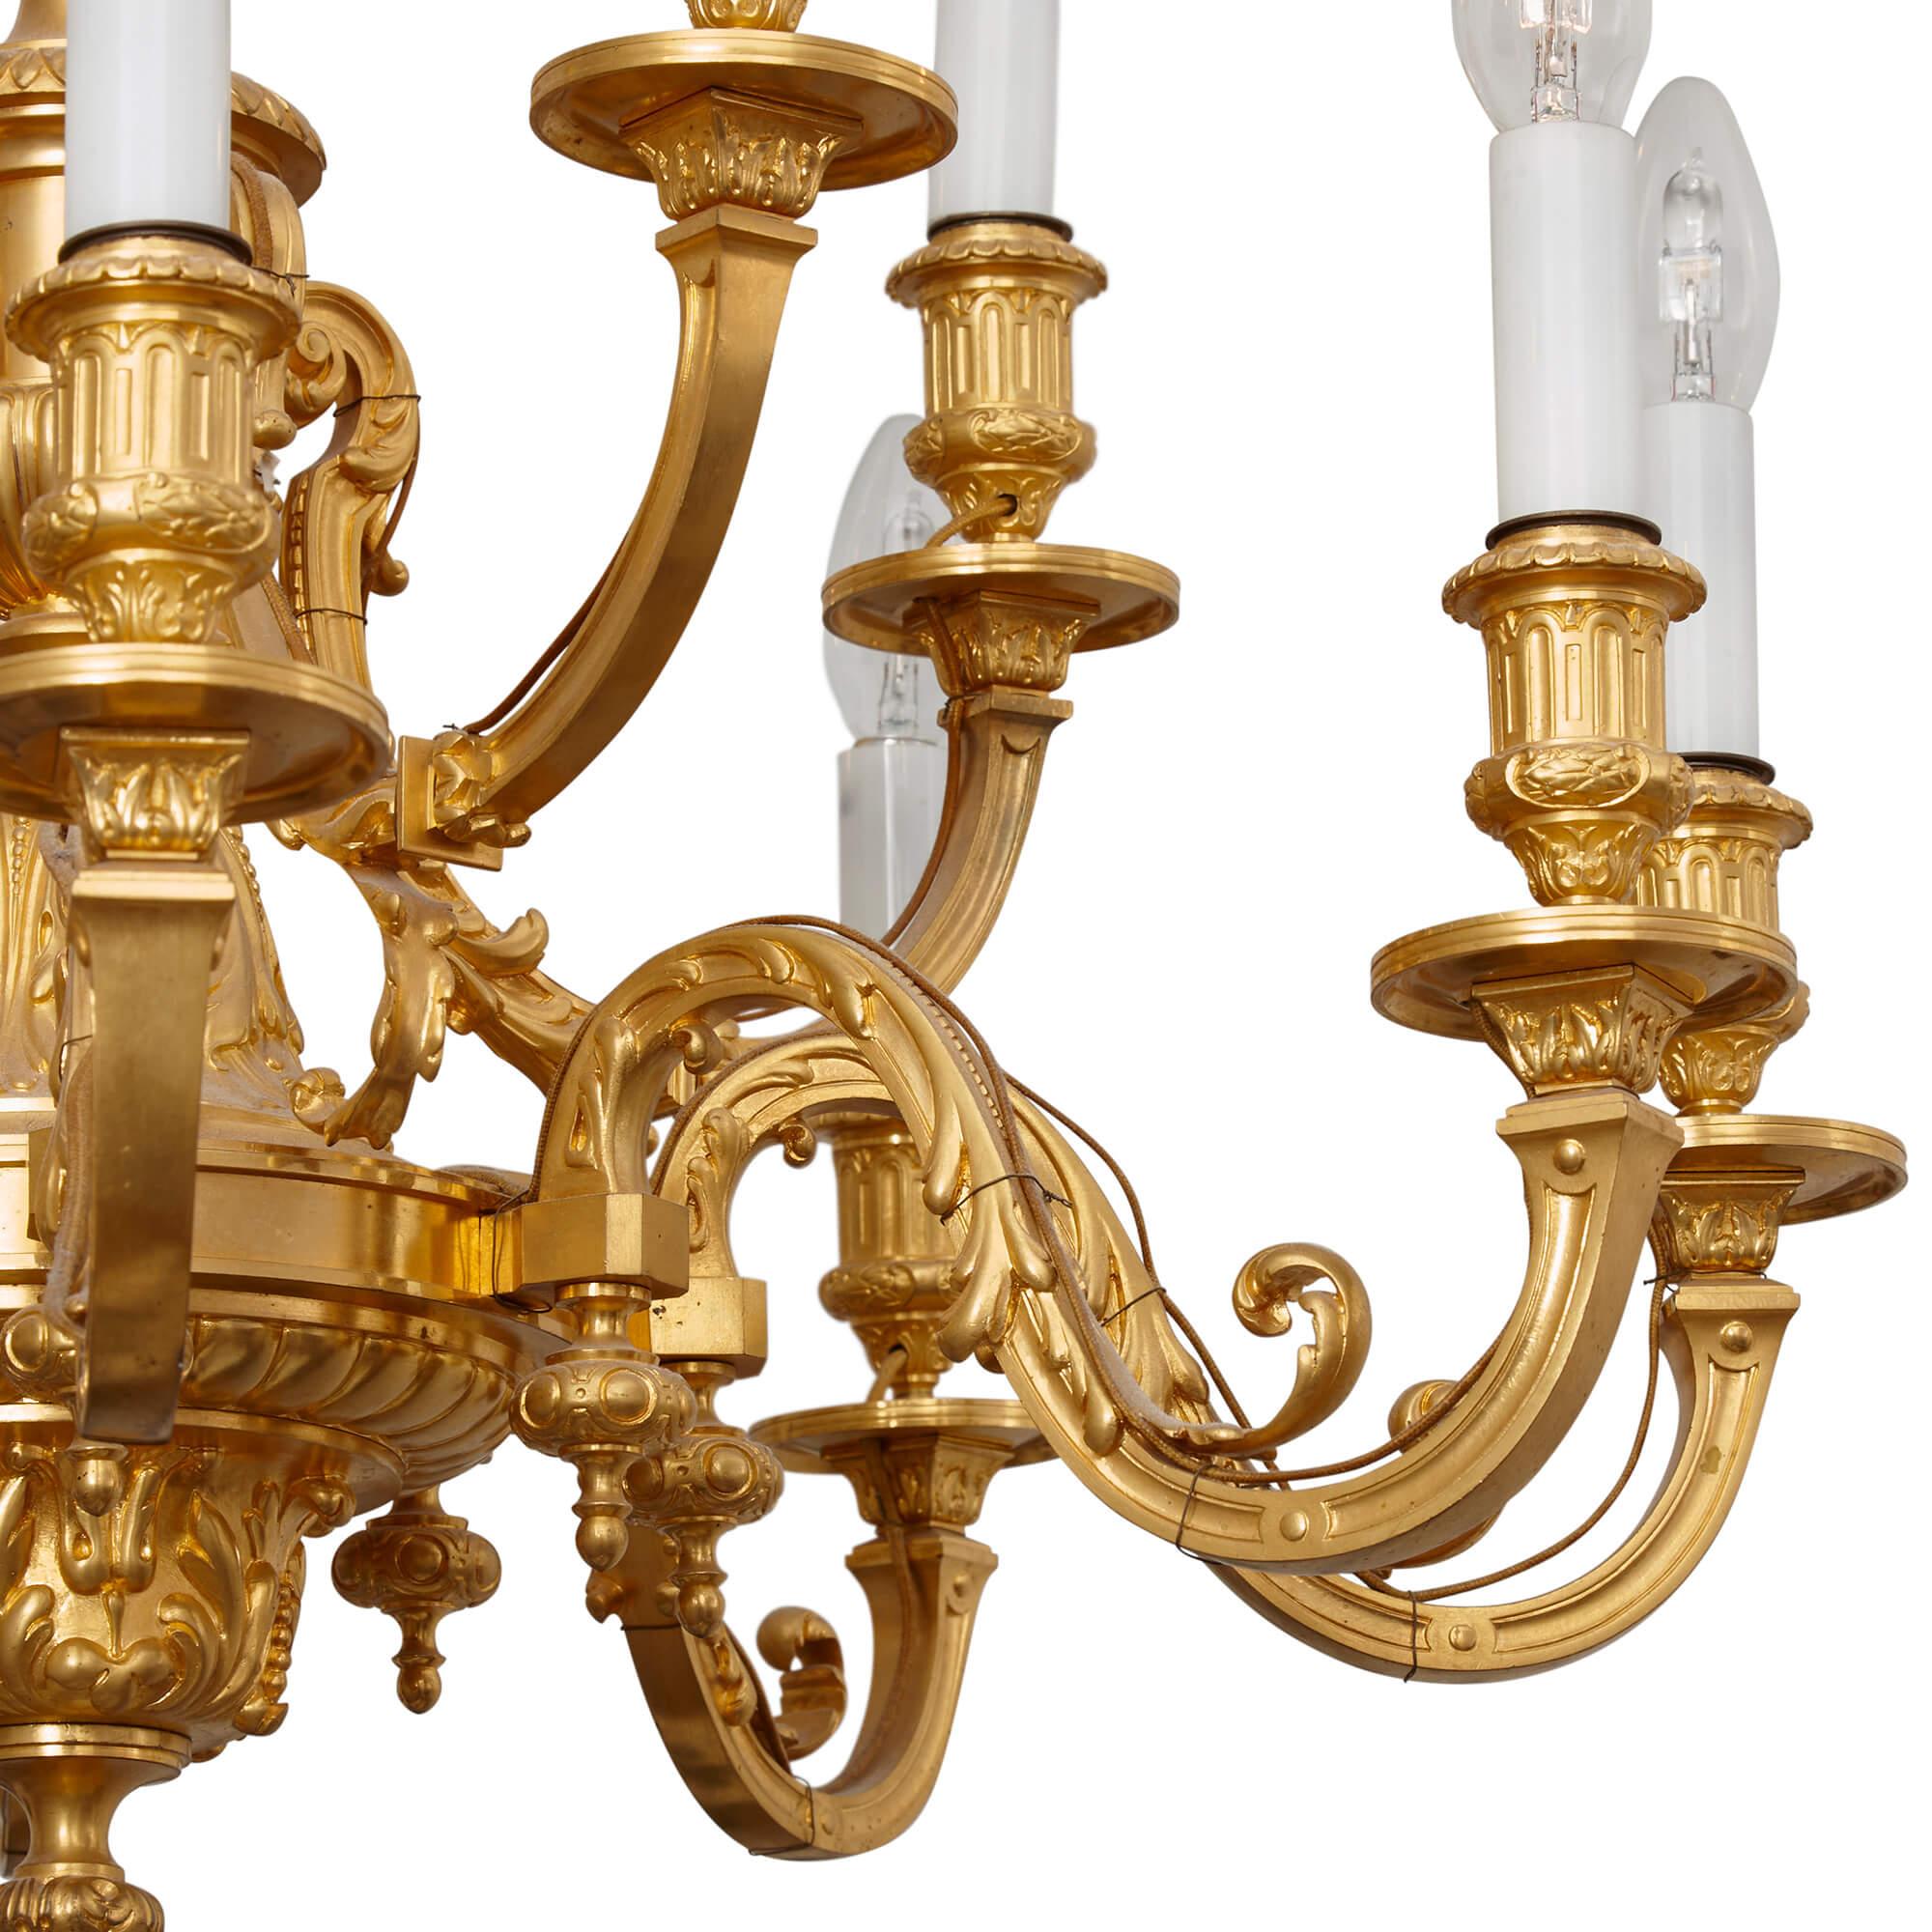 Antique Louis XIV-style ormolu chandelier by Barbedienne
French, Late 19th Century 
Height 100cm, diameter 75cm

This superb chandelier is crafted by Ferdinand Barbedienne, one of the finest metalworkers of the 19th century. The chandelier features